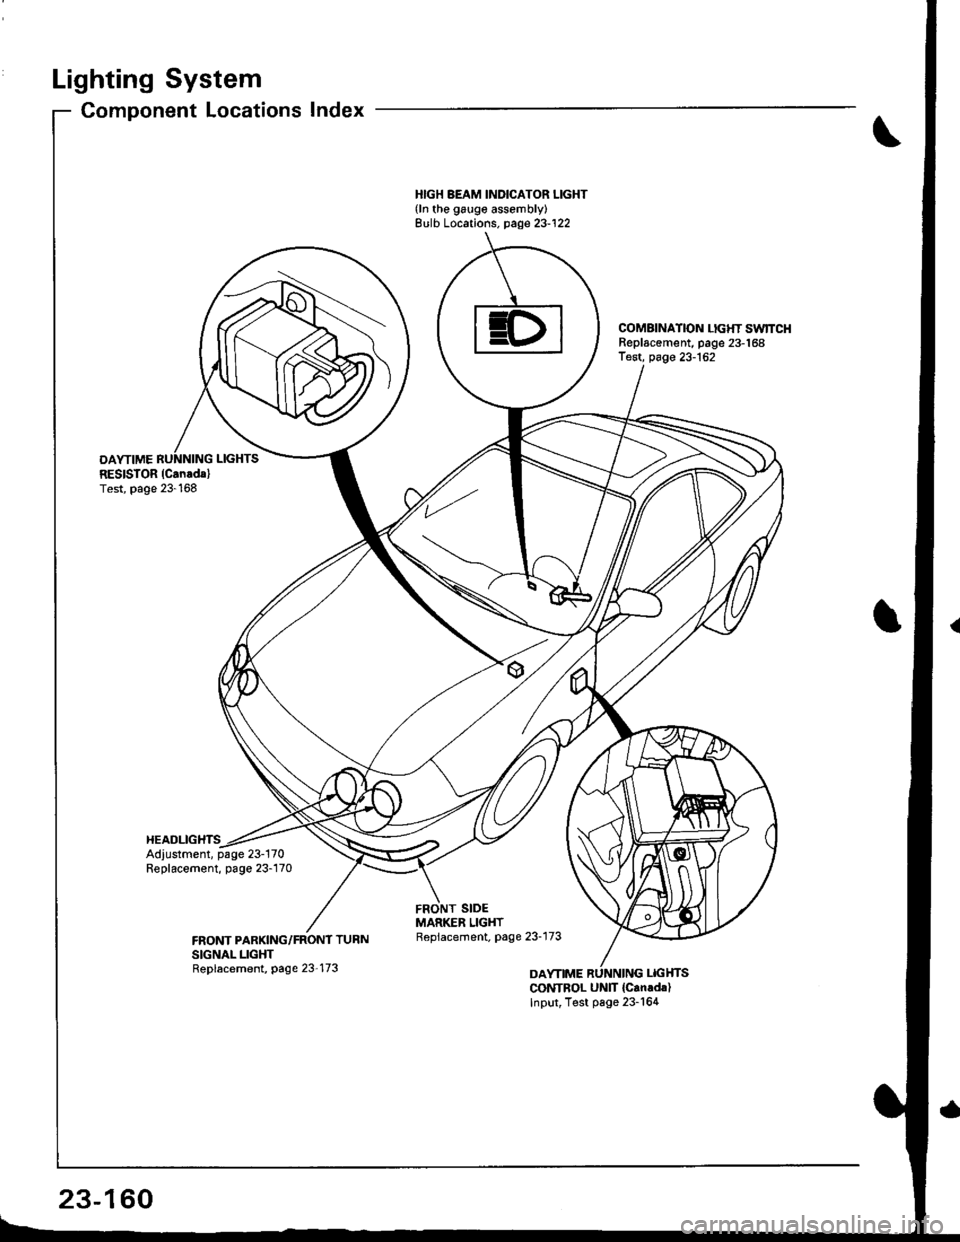 HONDA INTEGRA 1998 4.G Workshop Manual Lighting System
OAYTIMERESISTOR (Can.dal
Test, page 23-168
HEADLIGHTS
Component Locations Index
HIGH BEAM INDICATOR LIGHT{ln the galge assembly}Bulb Locations. page 23-122
COMAINATION LIGHT SwlTCHRepl